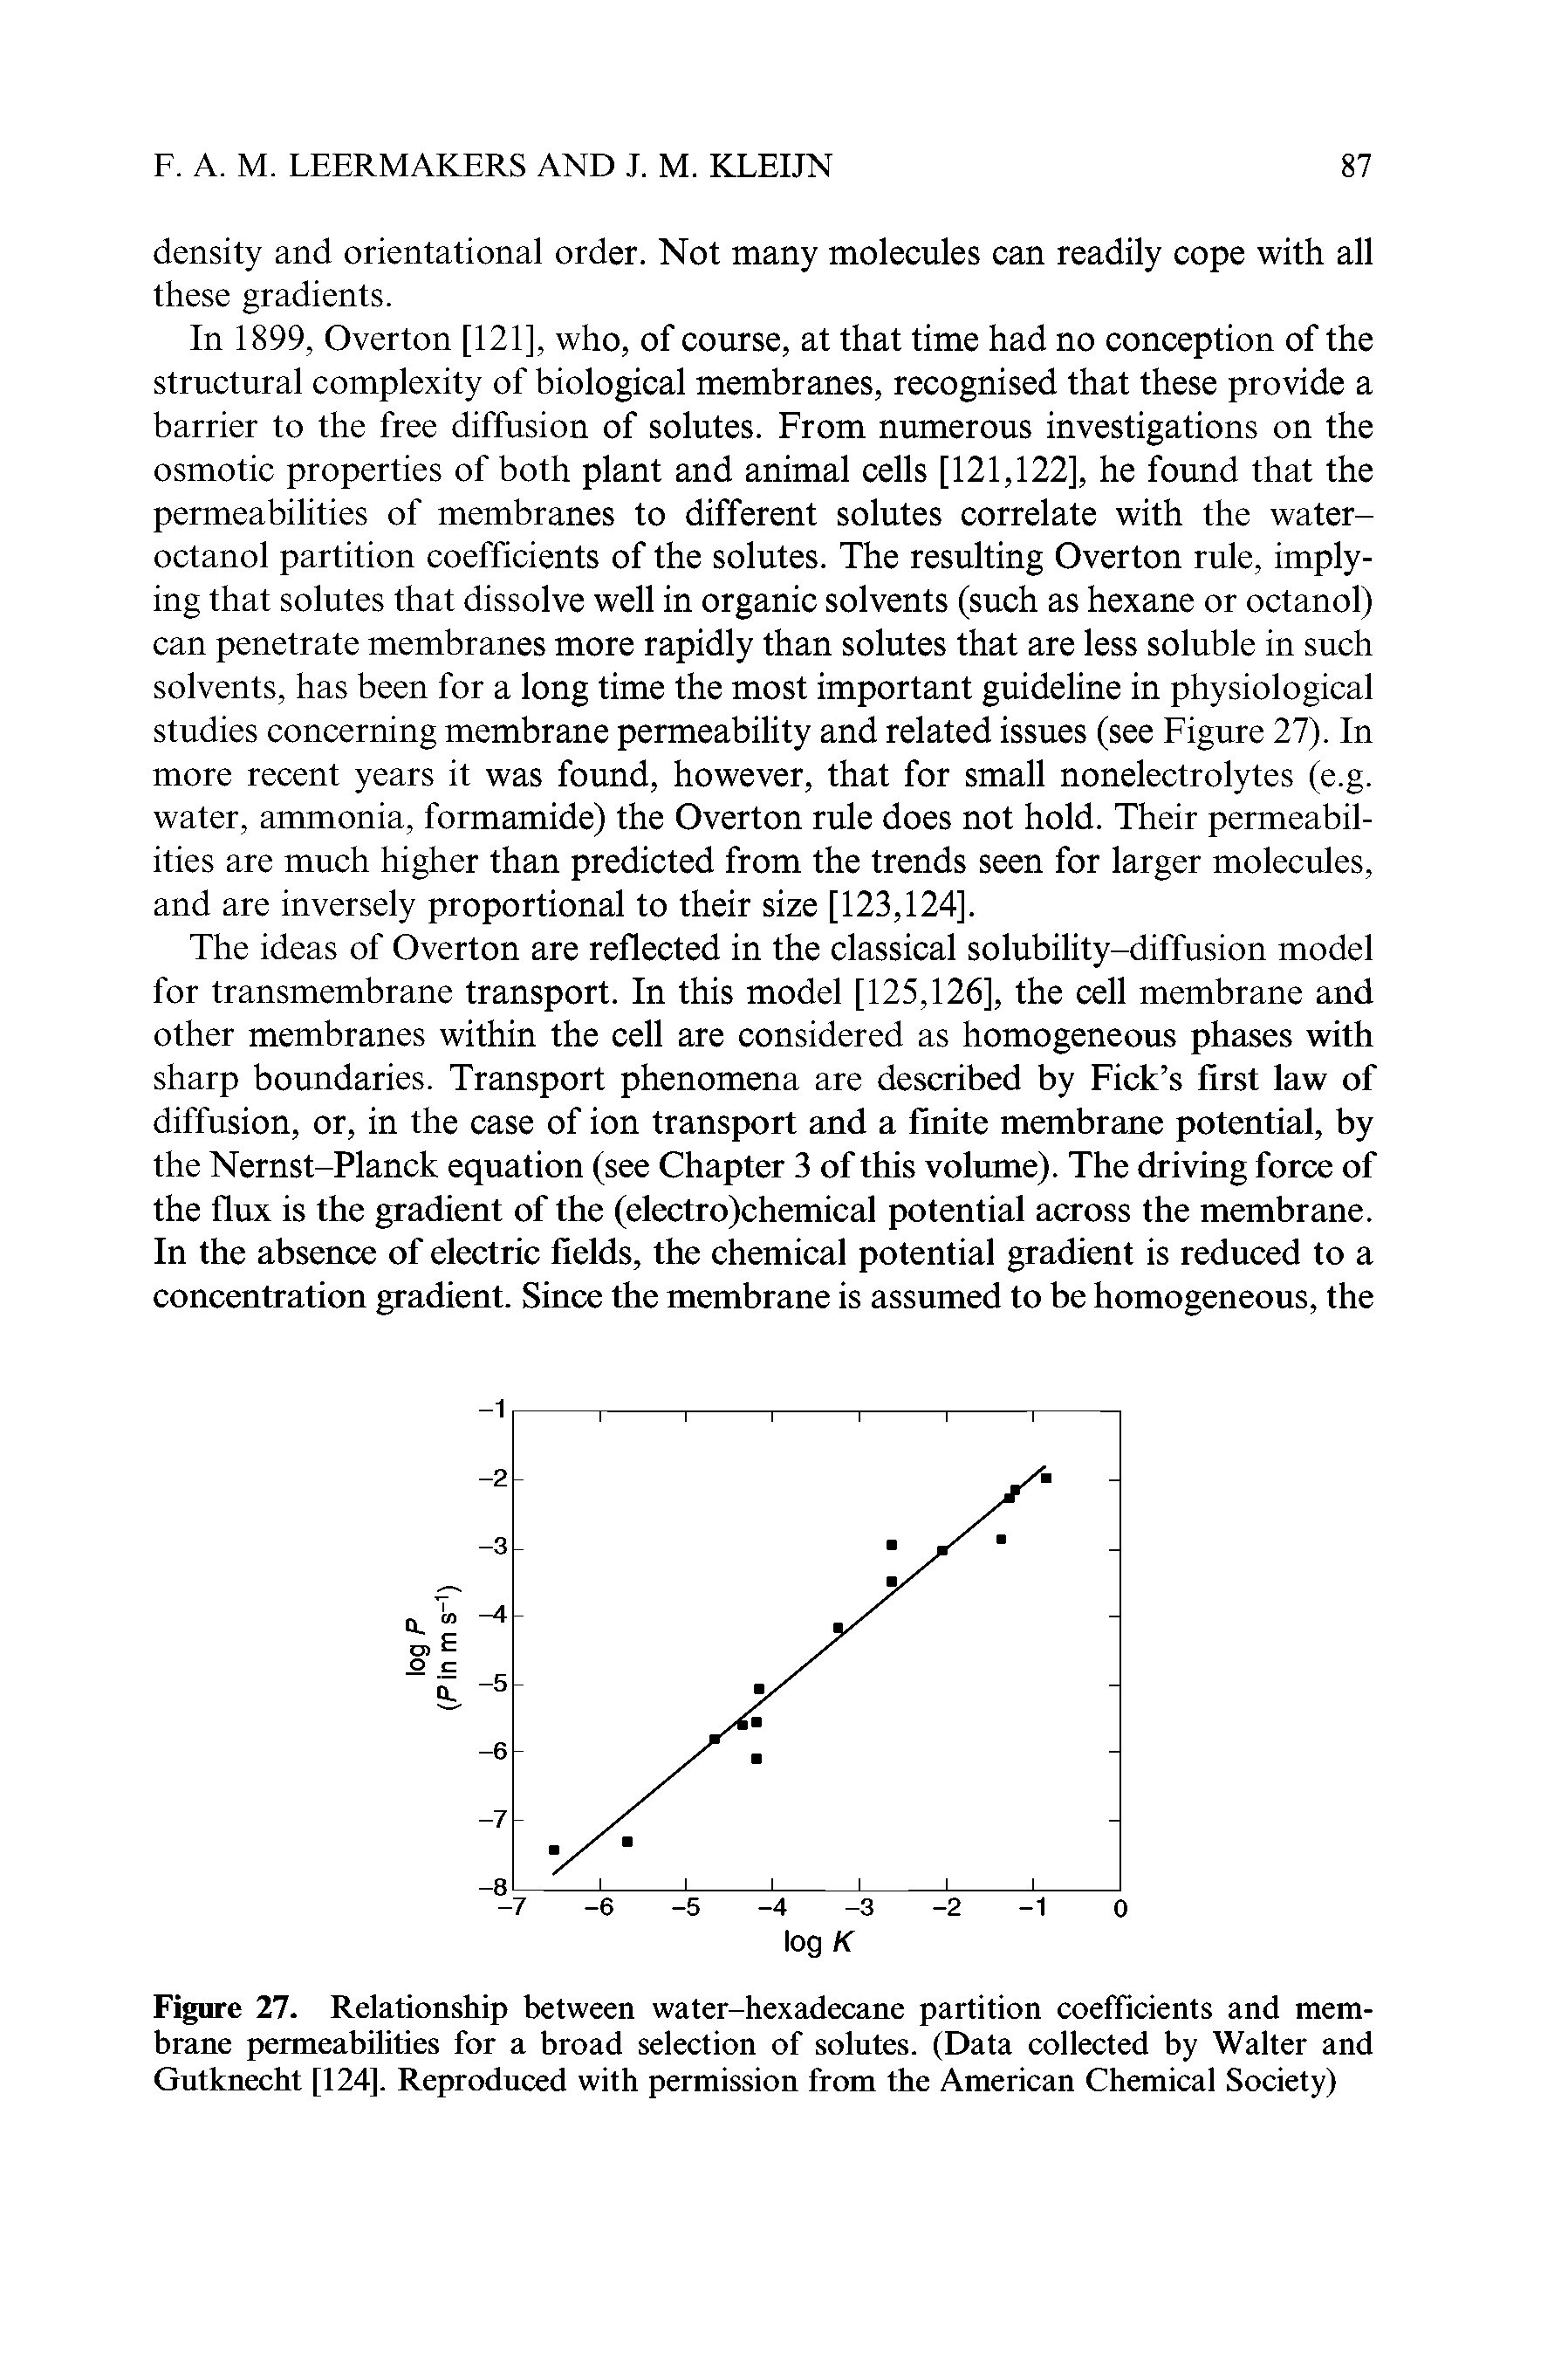 Figure 27. Relationship between water-hexadecane partition coefficients and membrane permeabilities for a broad selection of solutes. (Data collected by Walter and Gutknecht [124]. Reproduced with permission from the American Chemical Society)...